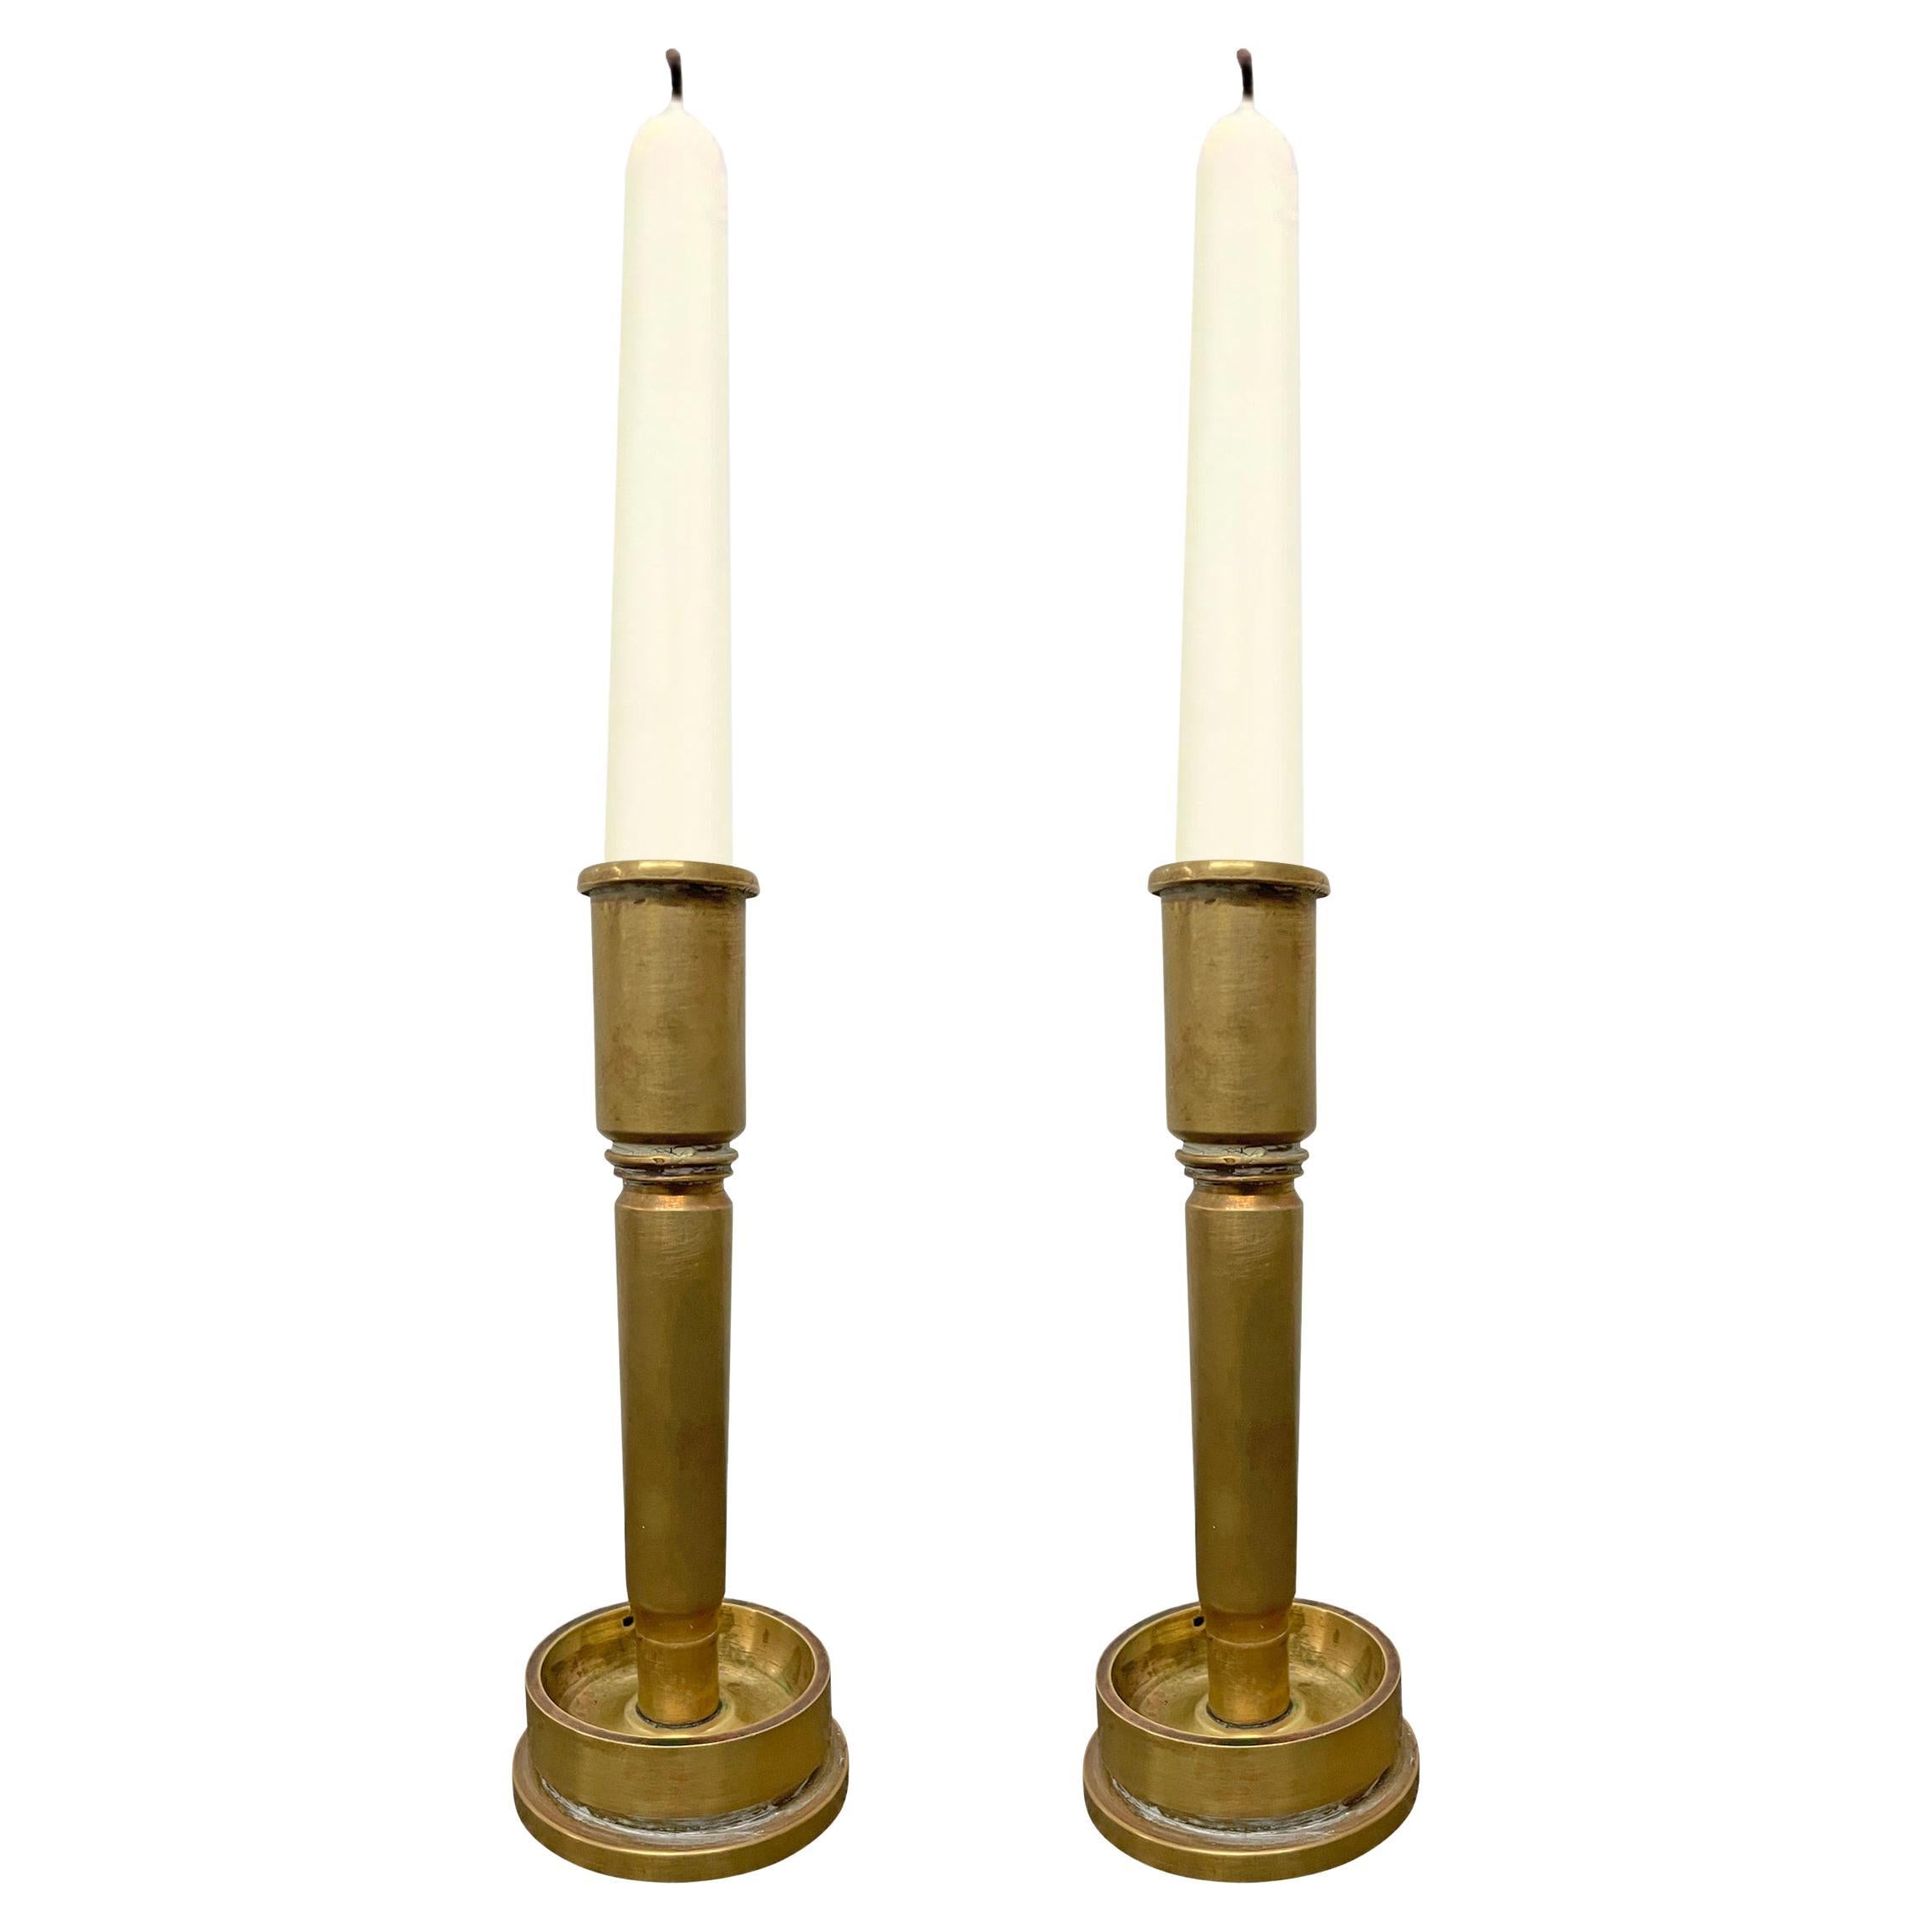 Pair of Trench Art Candlesticks For Sale